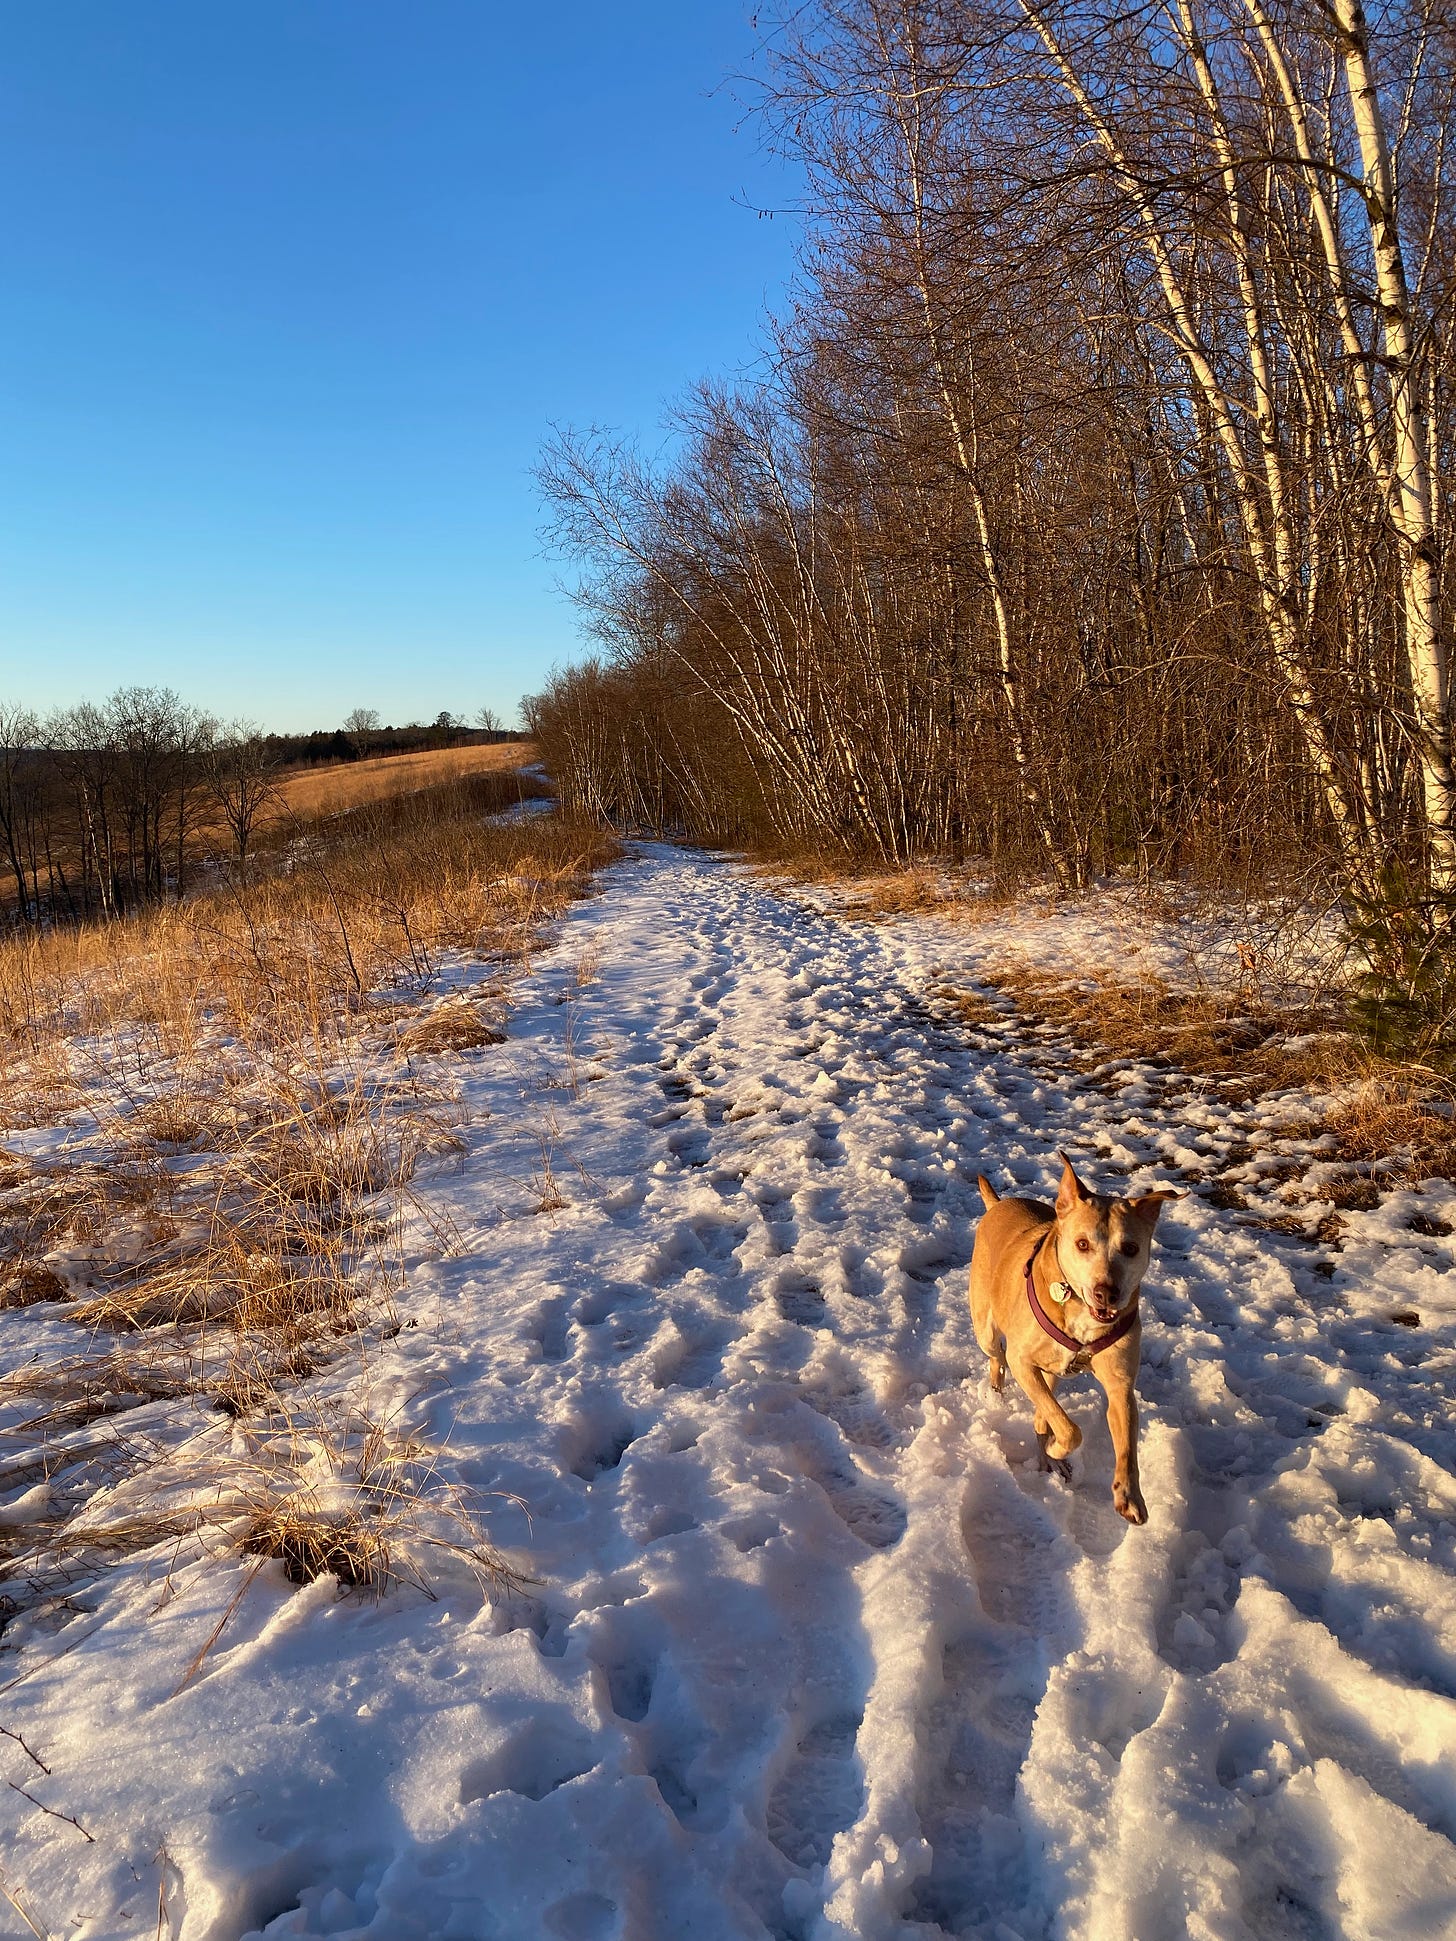 Nessa bounding along a snowy ridgetop path, with a golden meadow on one side and sunlit birches on the other. She’s midleap, legs extended and ears flapping.